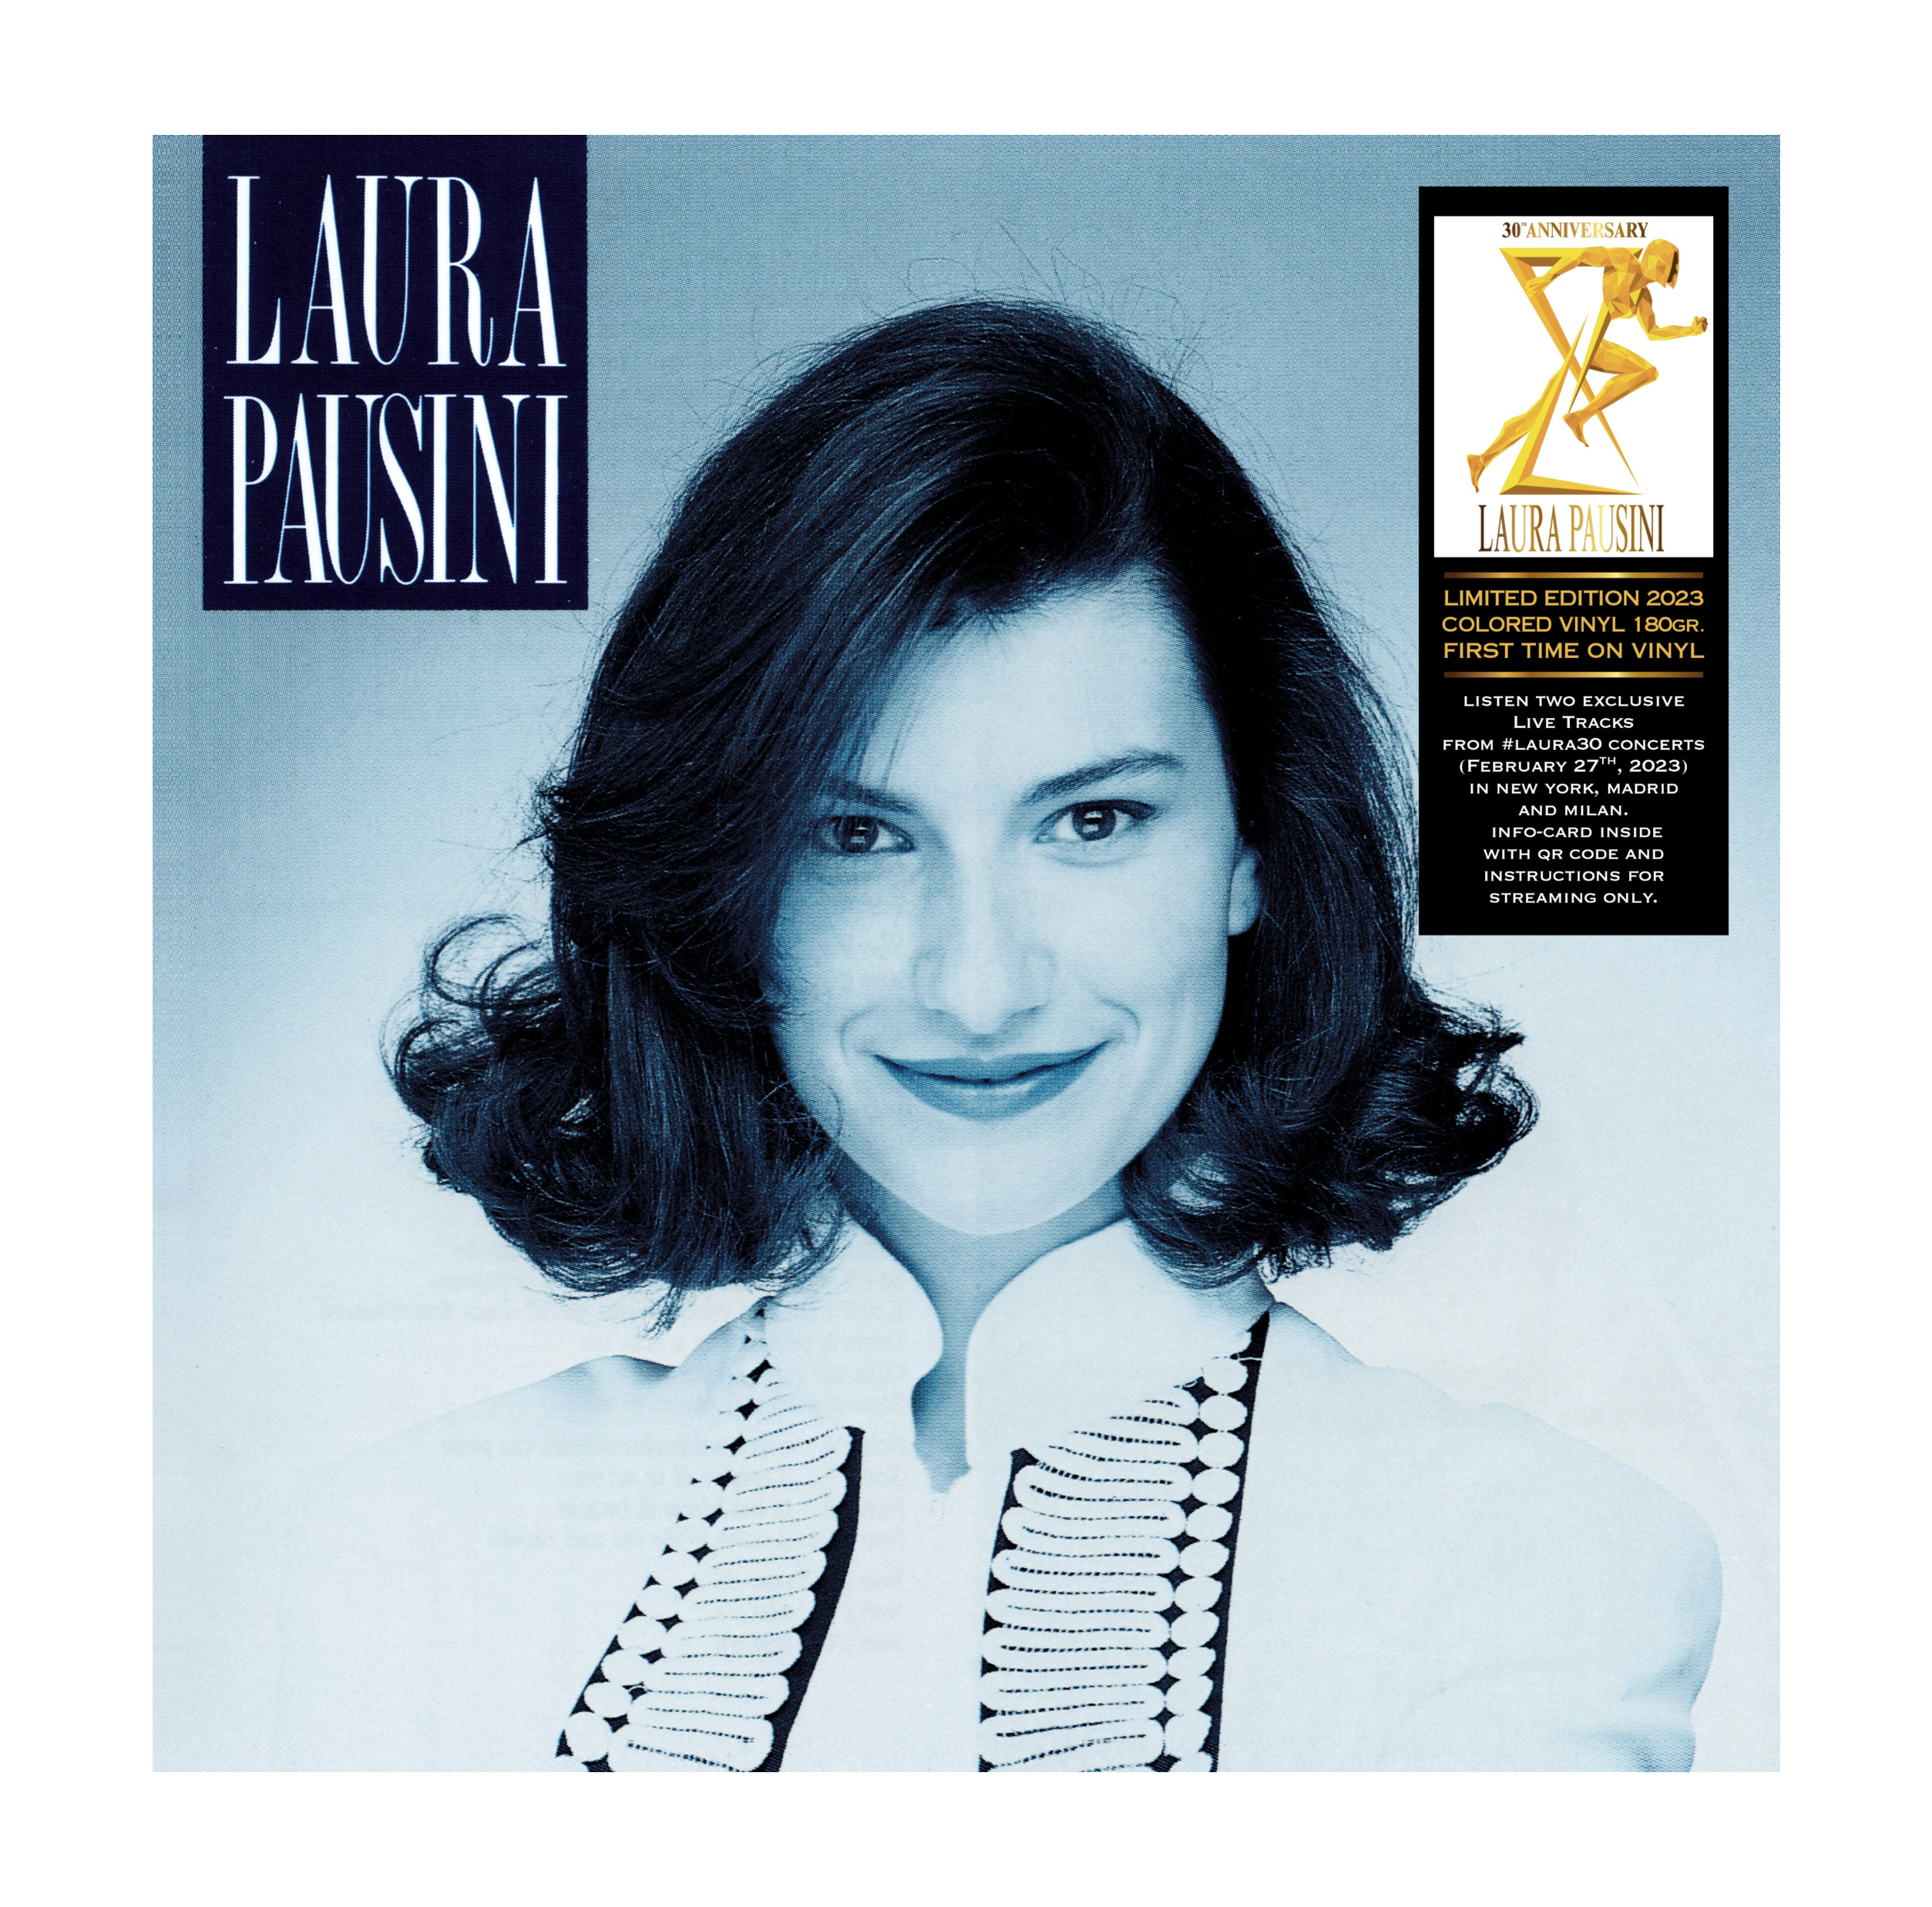 LAURA PAUSINI (1LP 180g Blue Vinyl. Limited & Numbered Edition)